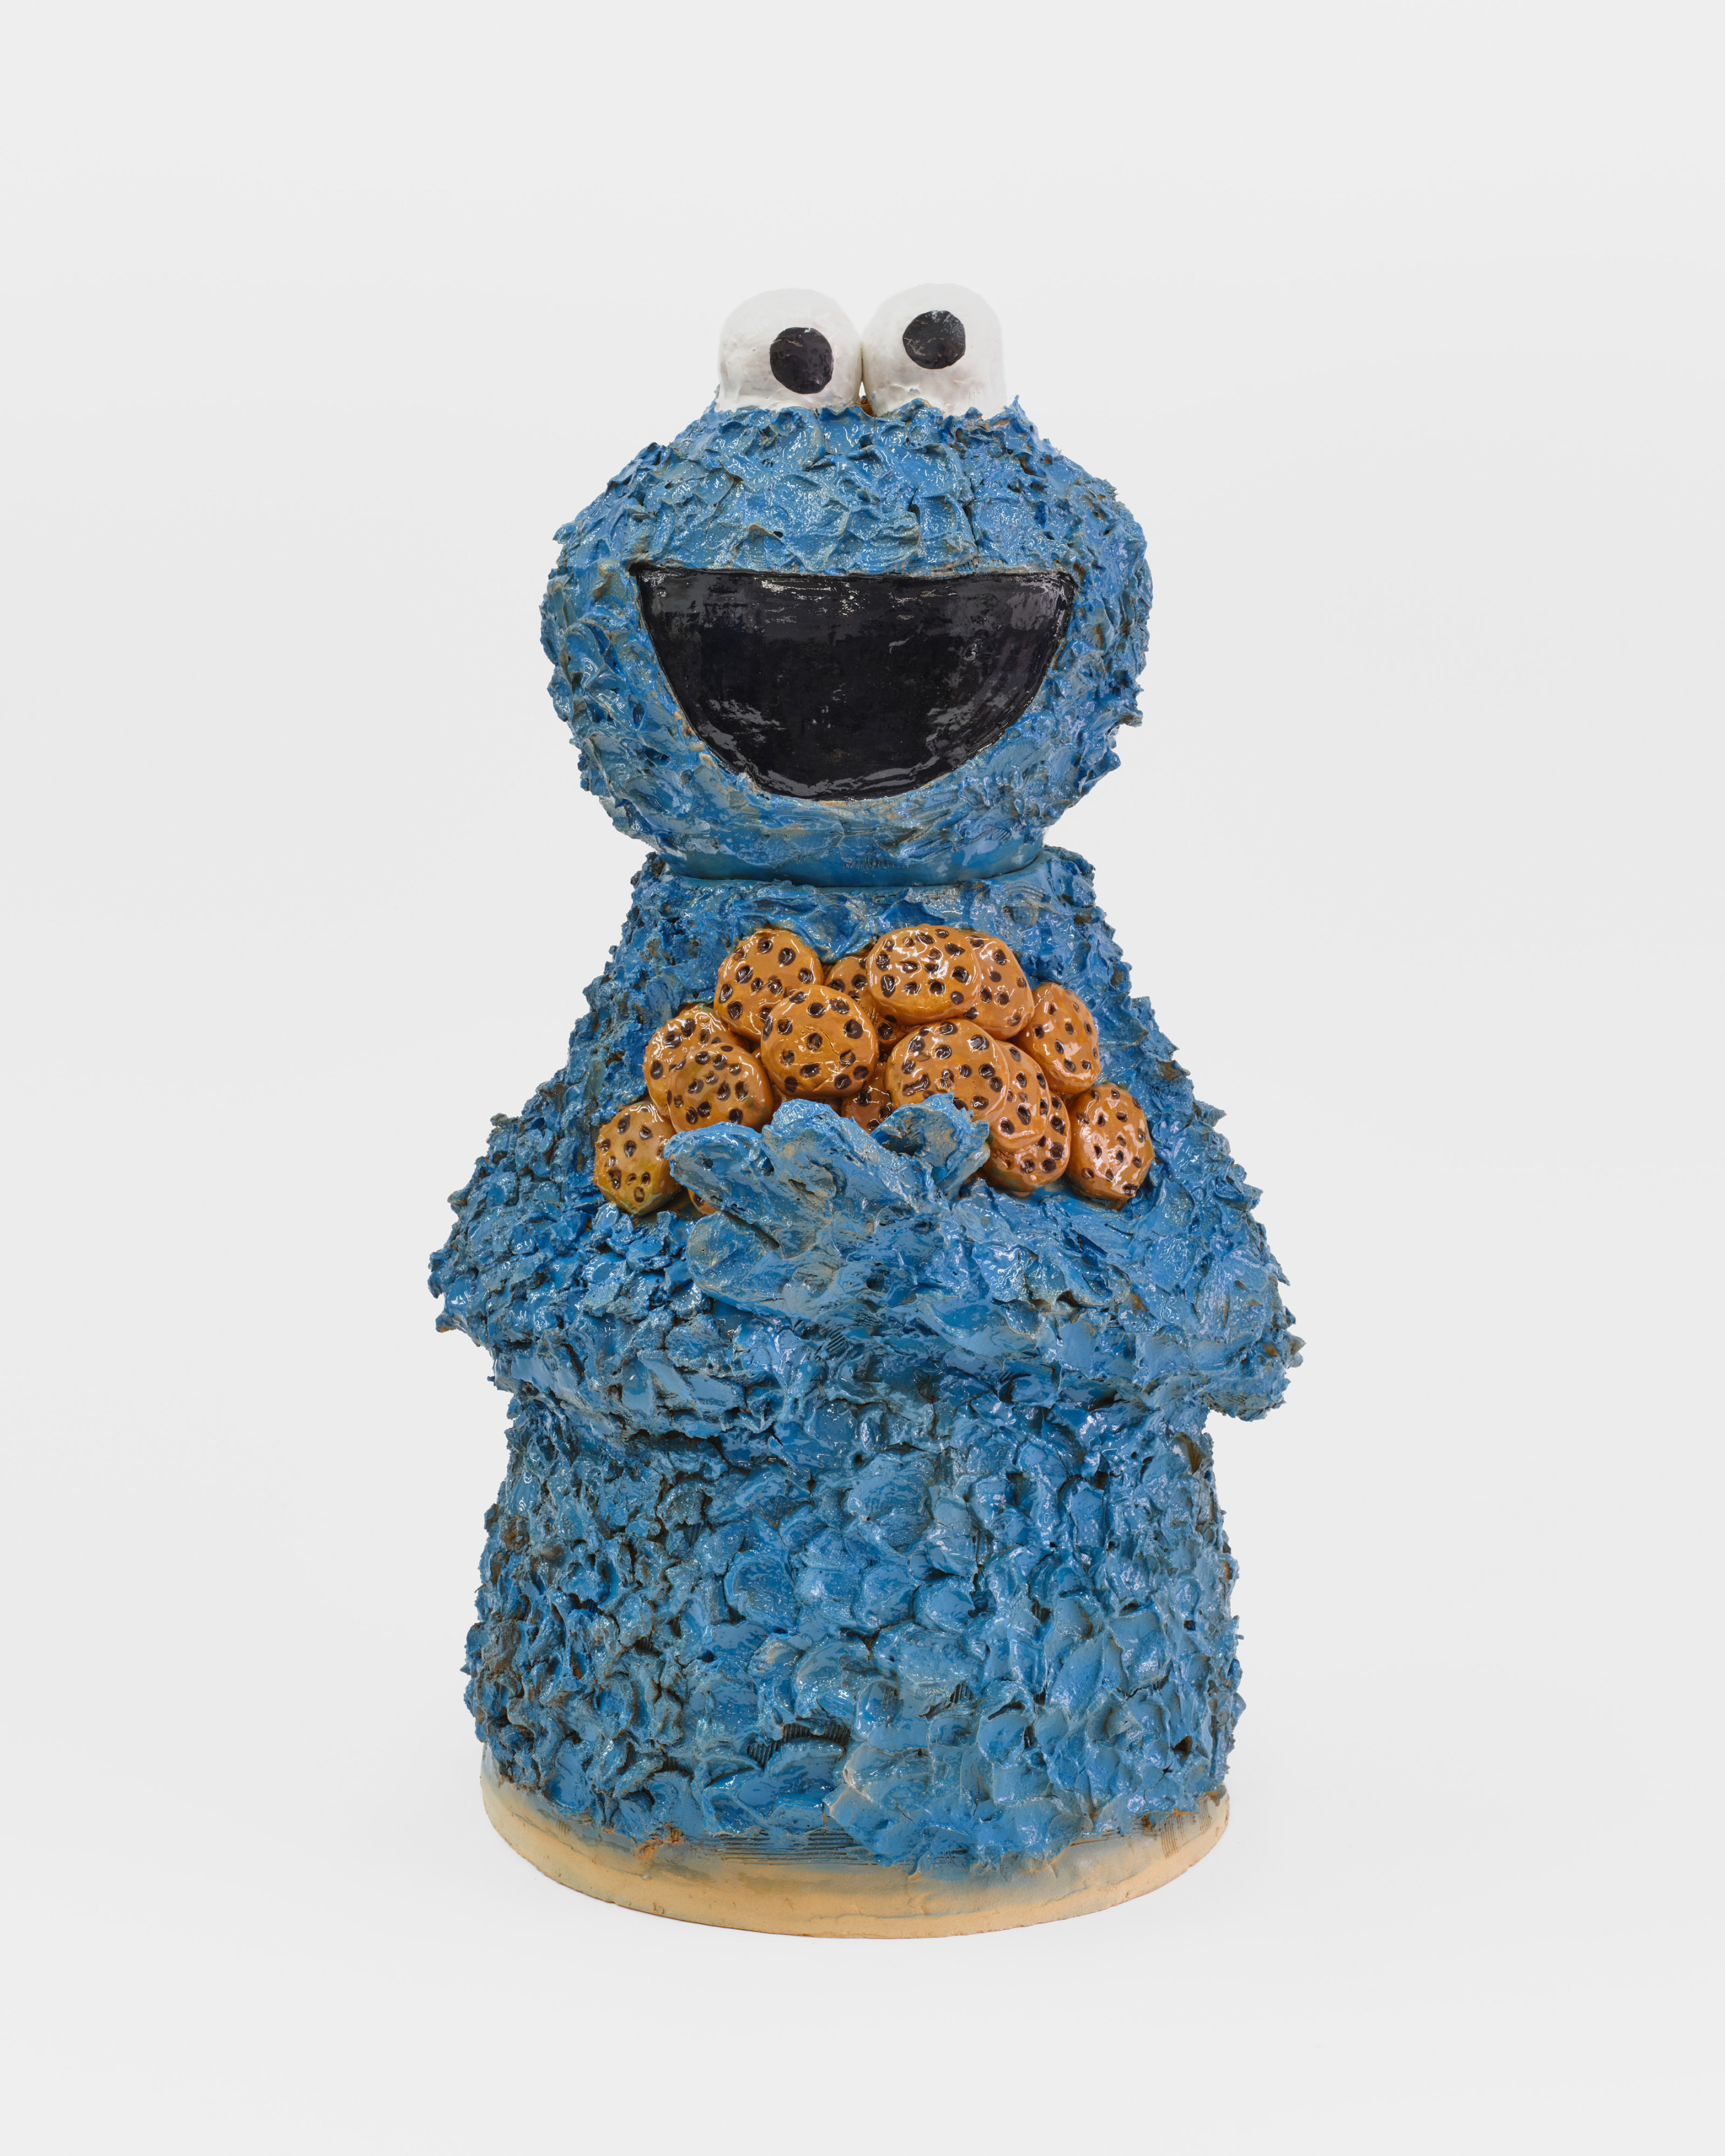 A ceramic sculpture of the Sesame Street Cookie Monster holding a bushel of chocolate chip cookies. 